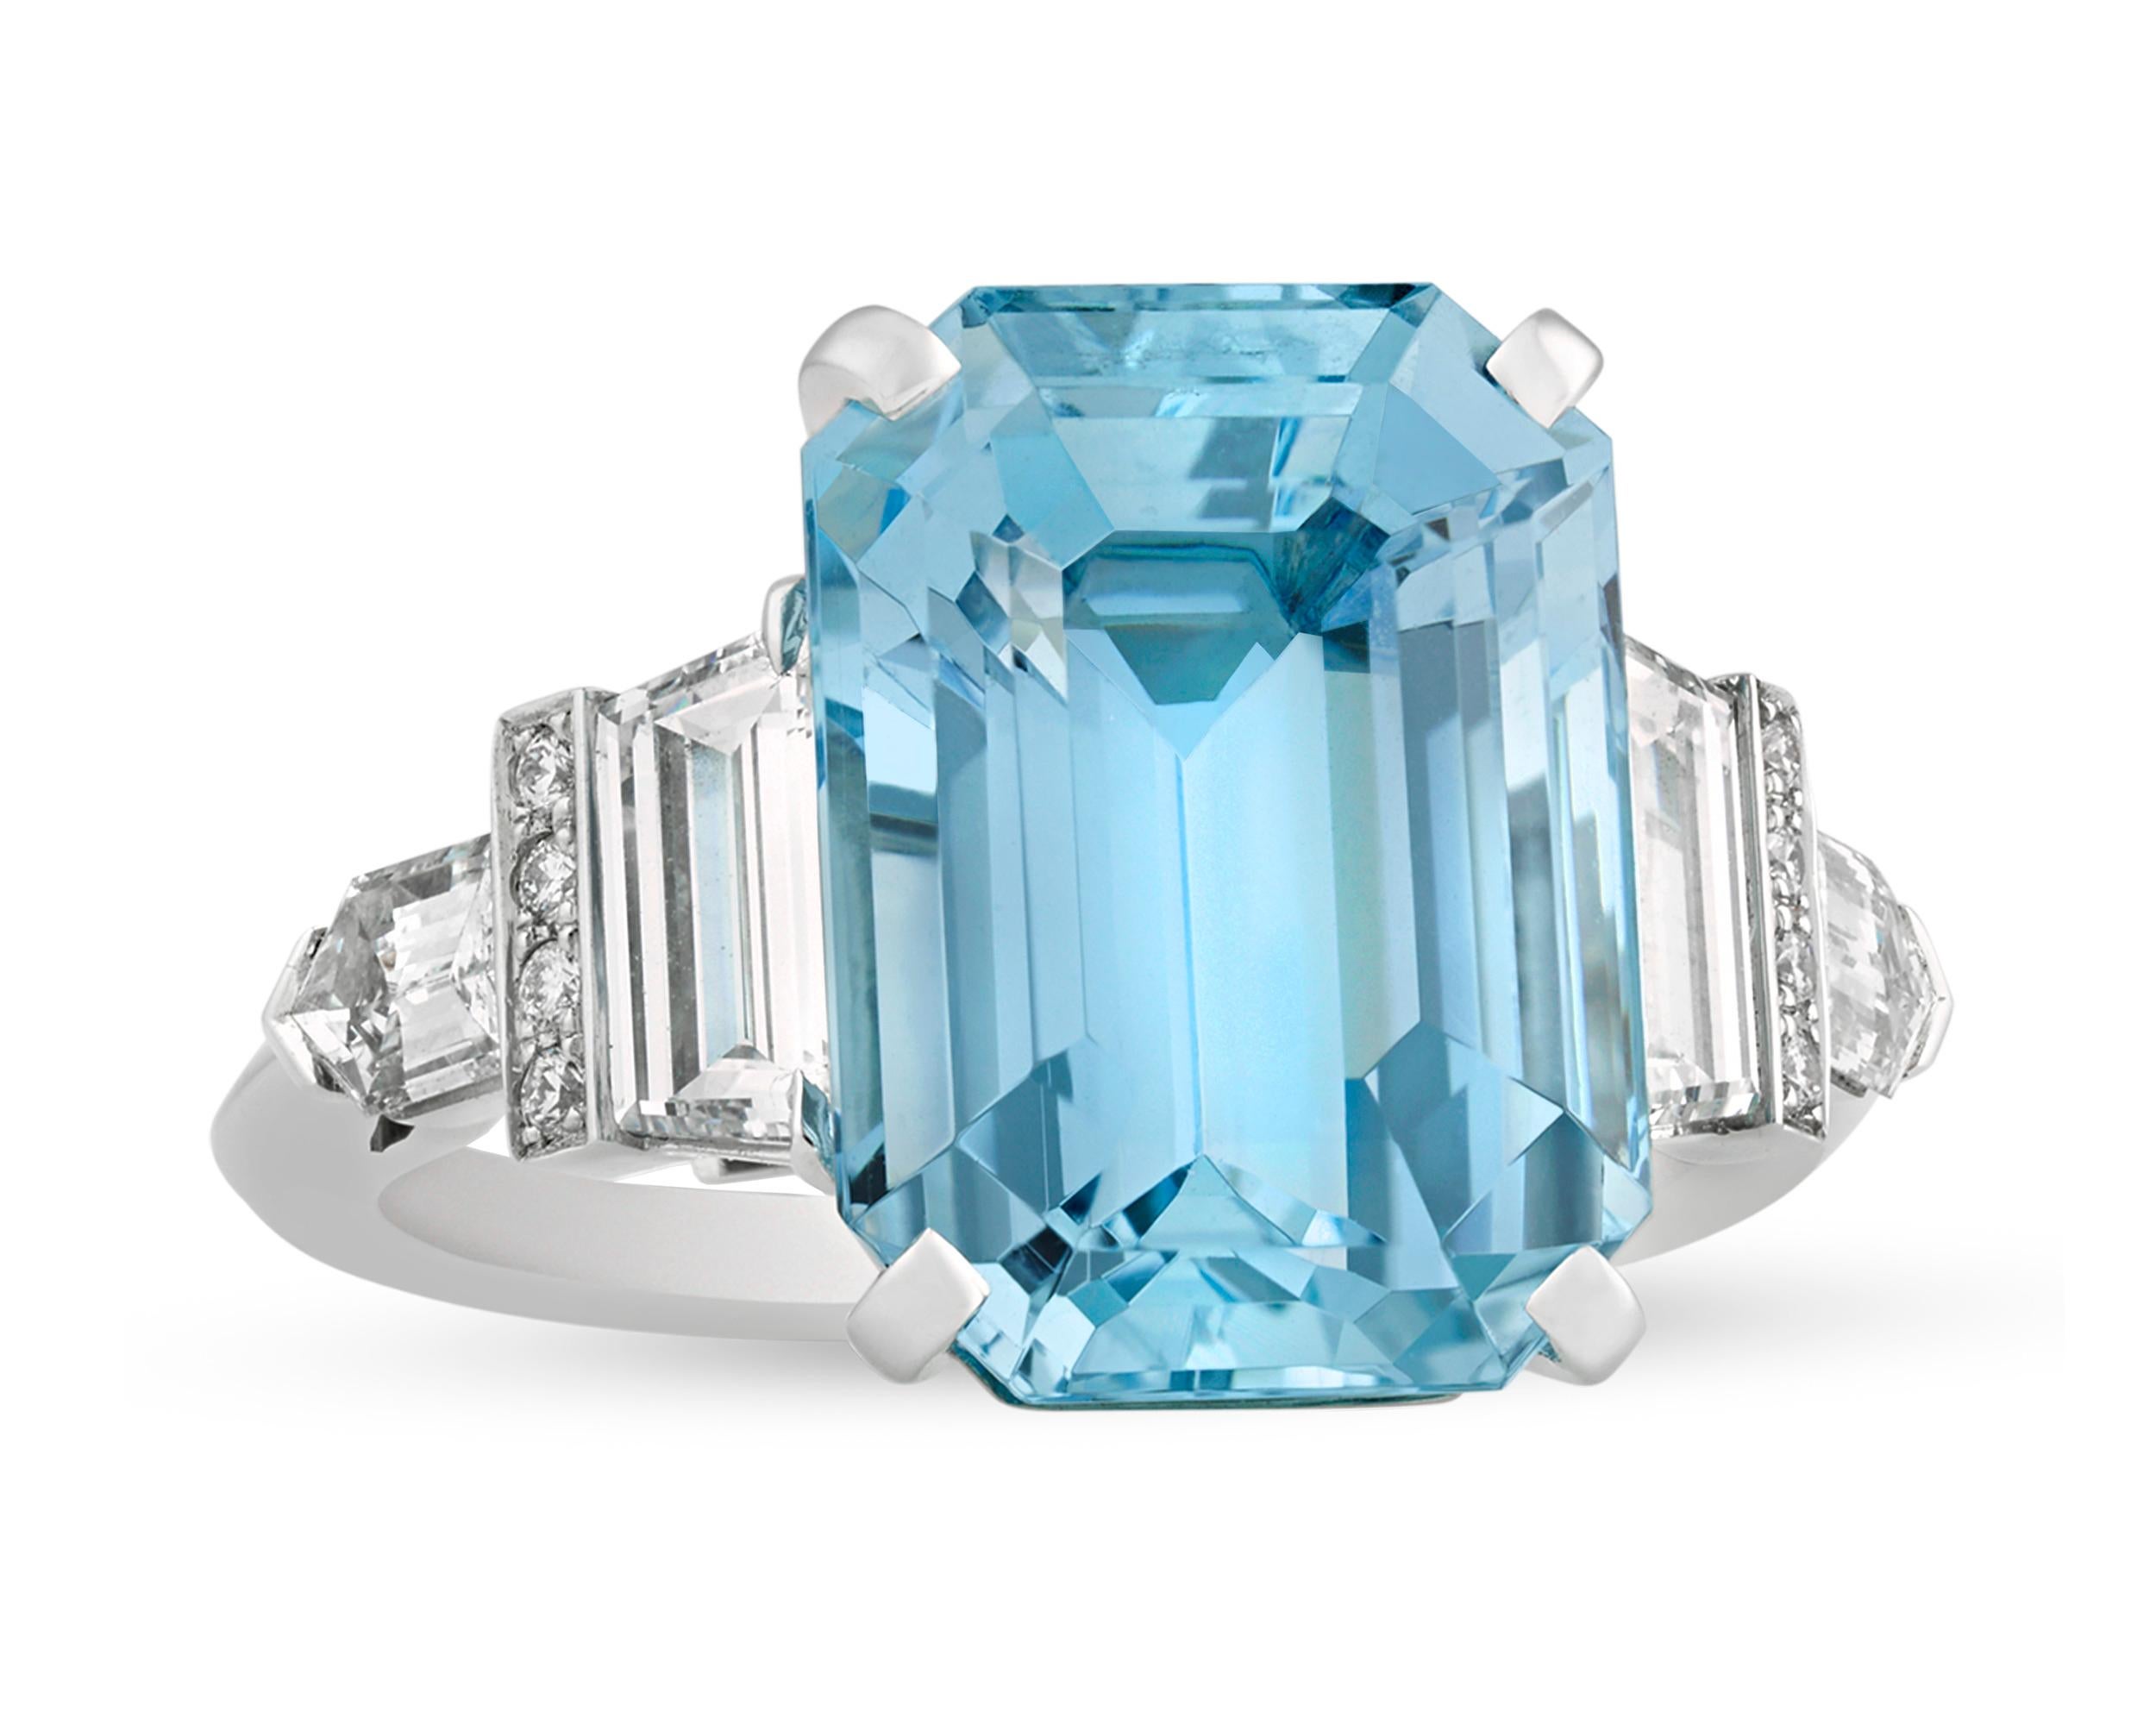 American jeweler and designer Raymond Yard created this spectacular cocktail ring centered by a vibrant 7.94-carat emerald-cut aquamarine. This enchanting aquamarine displays the refreshing, crisp blue color for which these stones are so coveted.